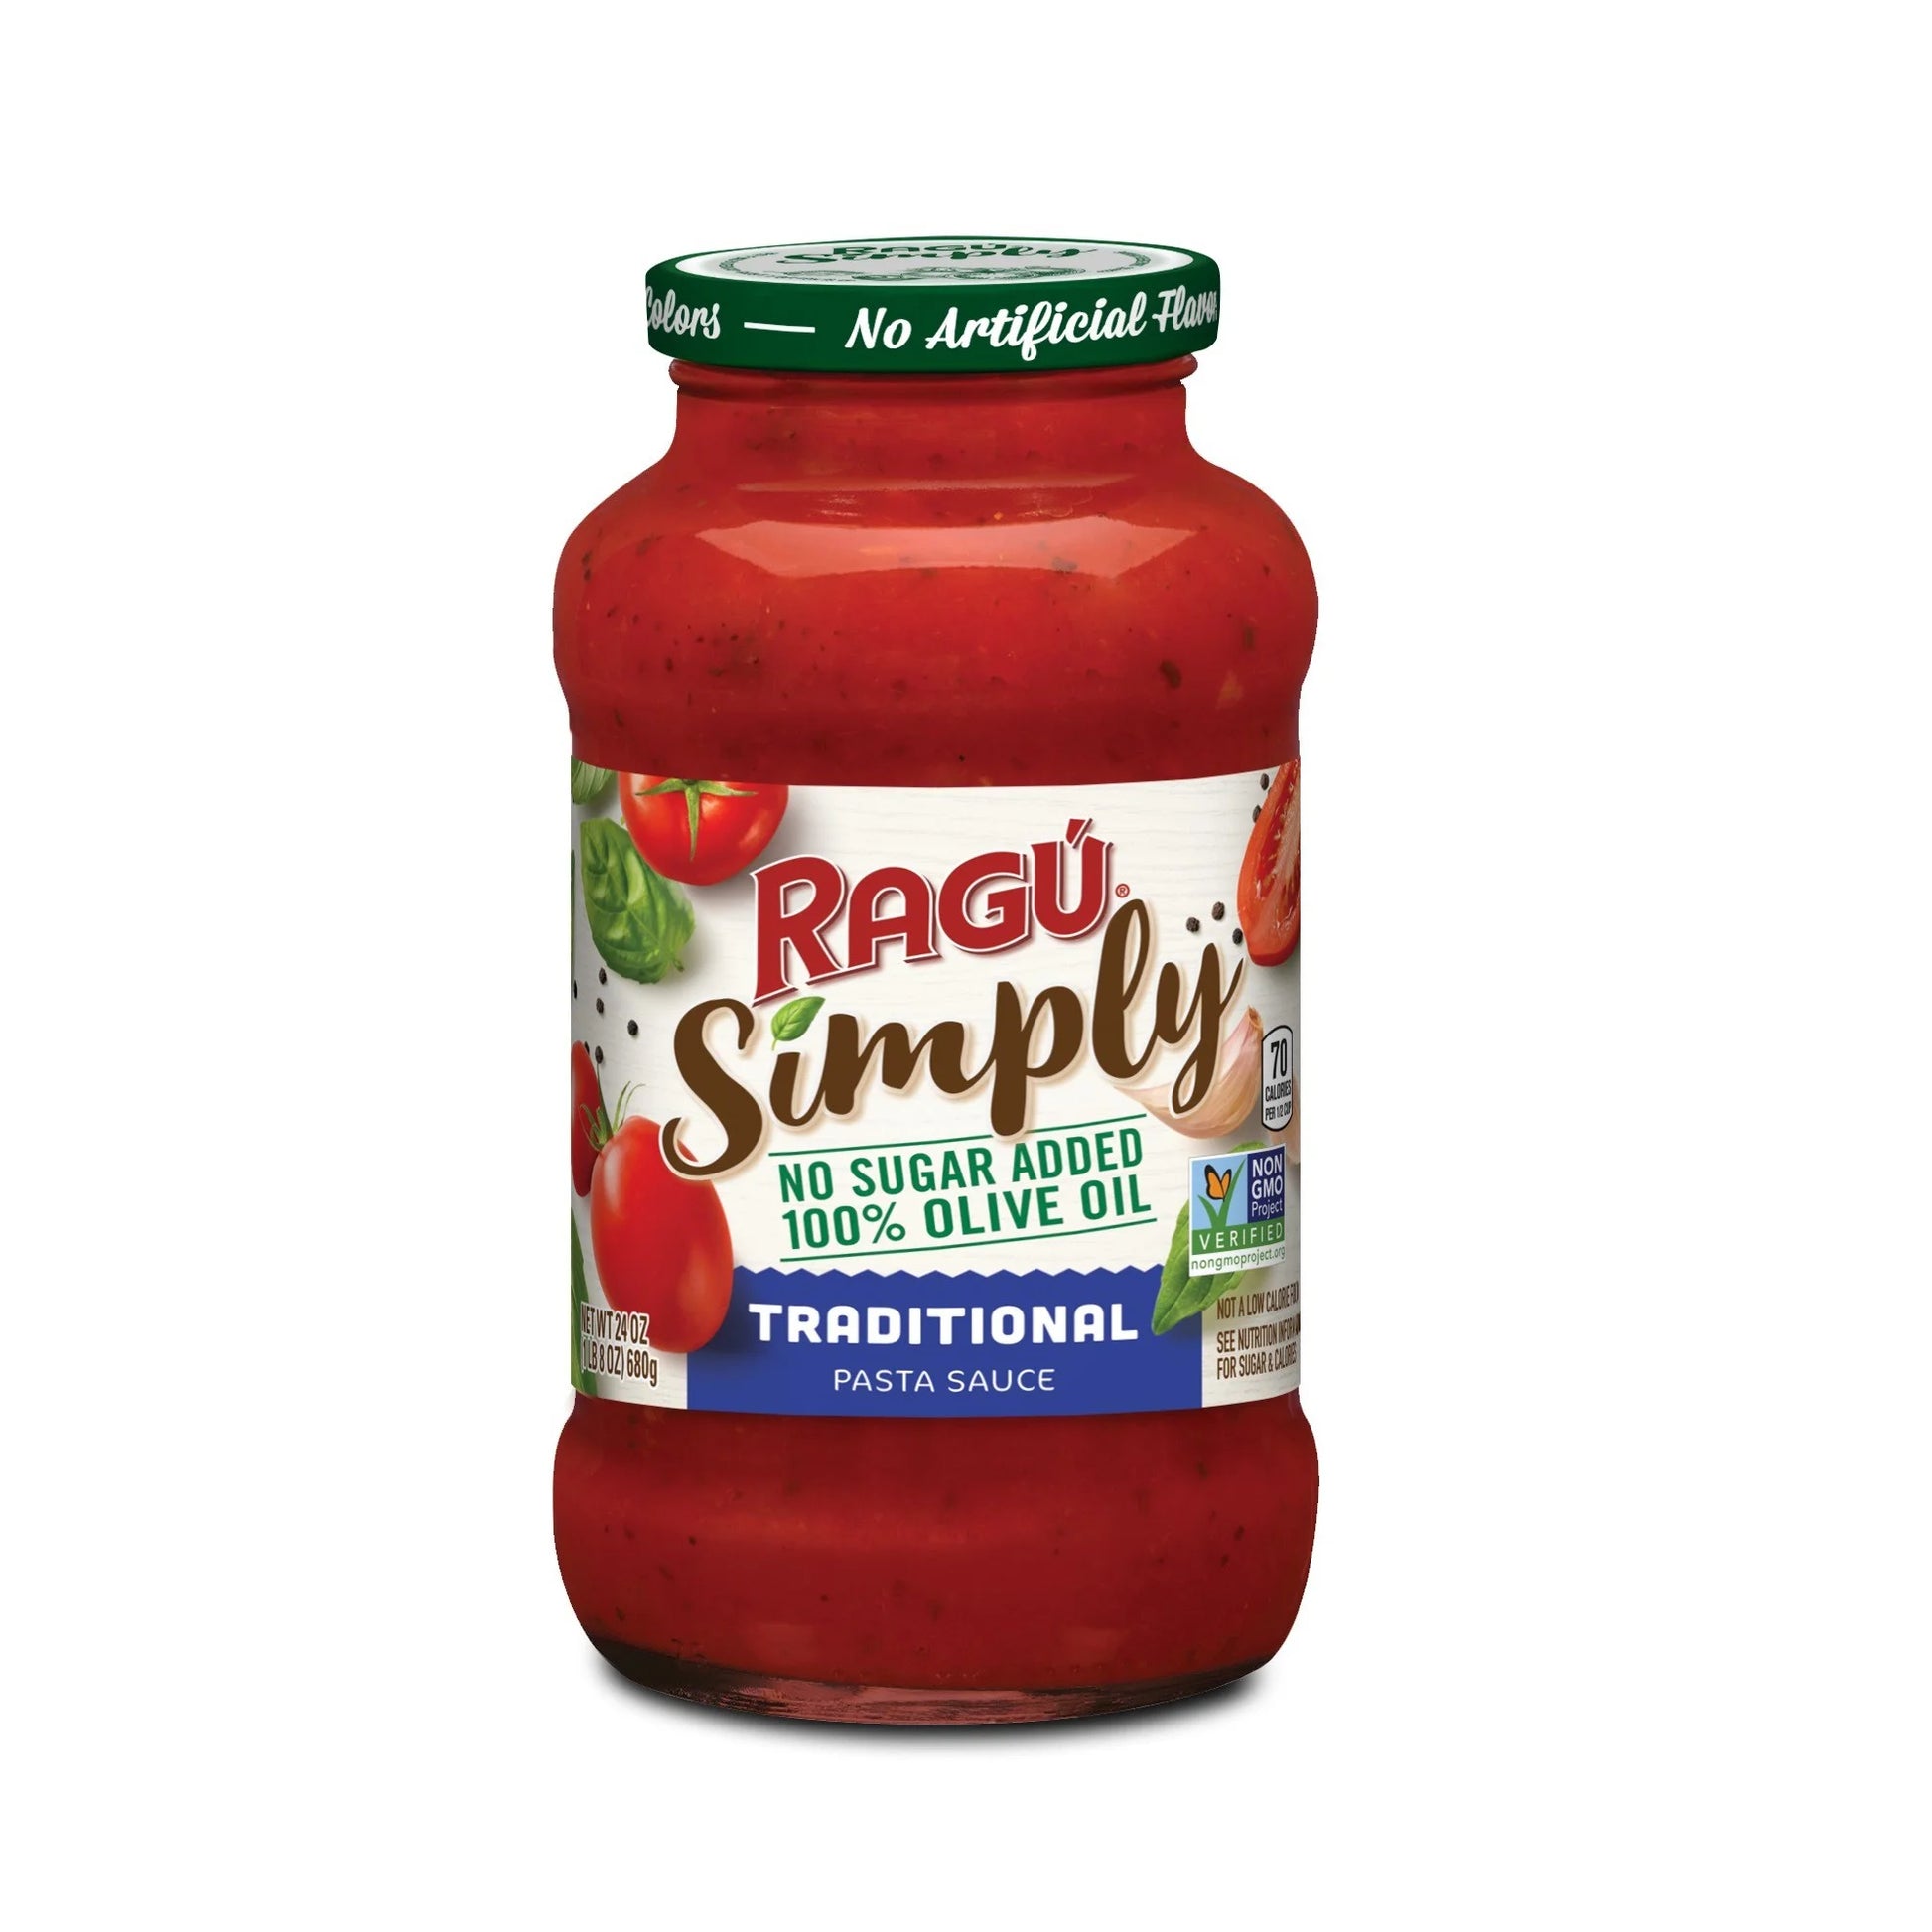 Ragú Simply™ Traditional Pasta Sauce, 24 Oz. (Pack of 8)